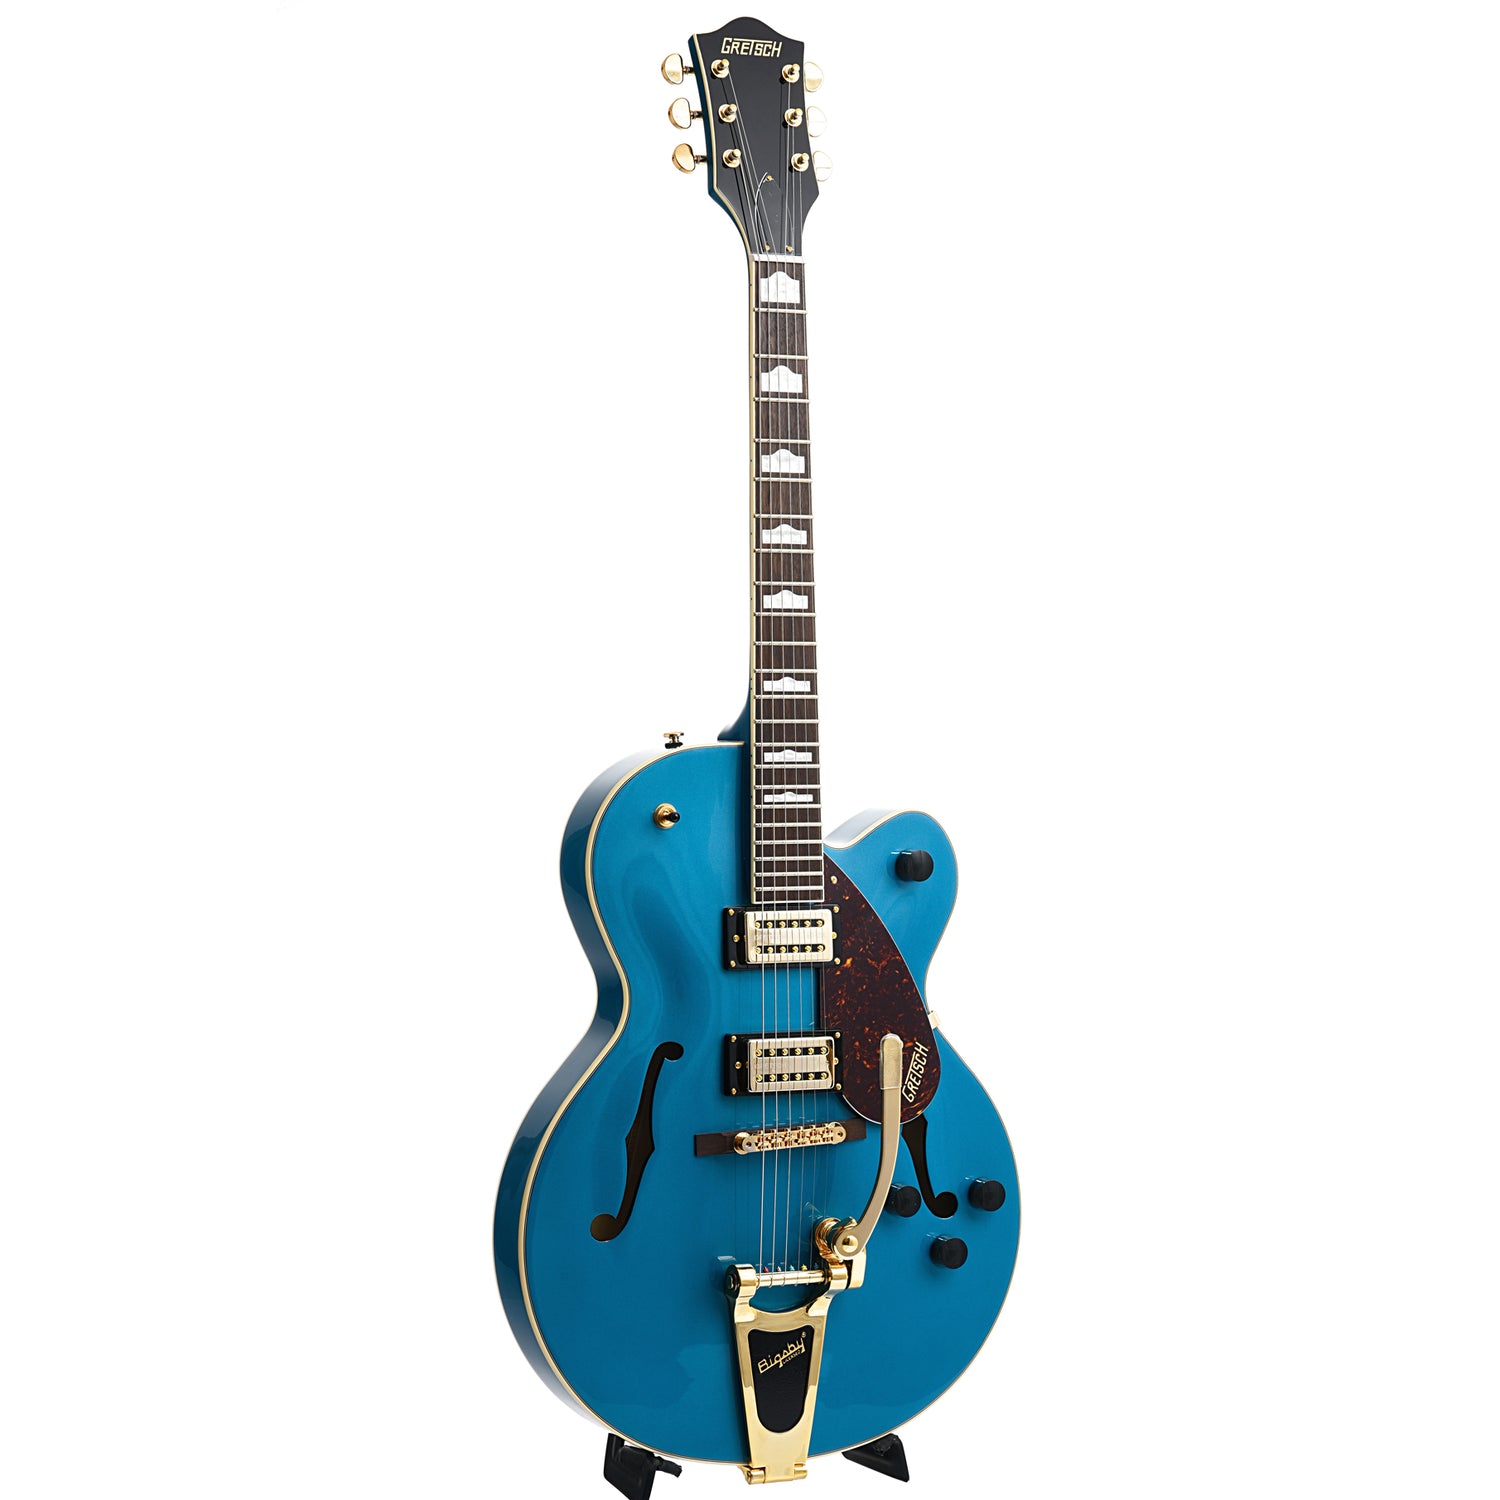 Full front and side of Gretsch G2410TG Streamliner Hollow Body Single Cut with Bigsby, Ocean Turquoise